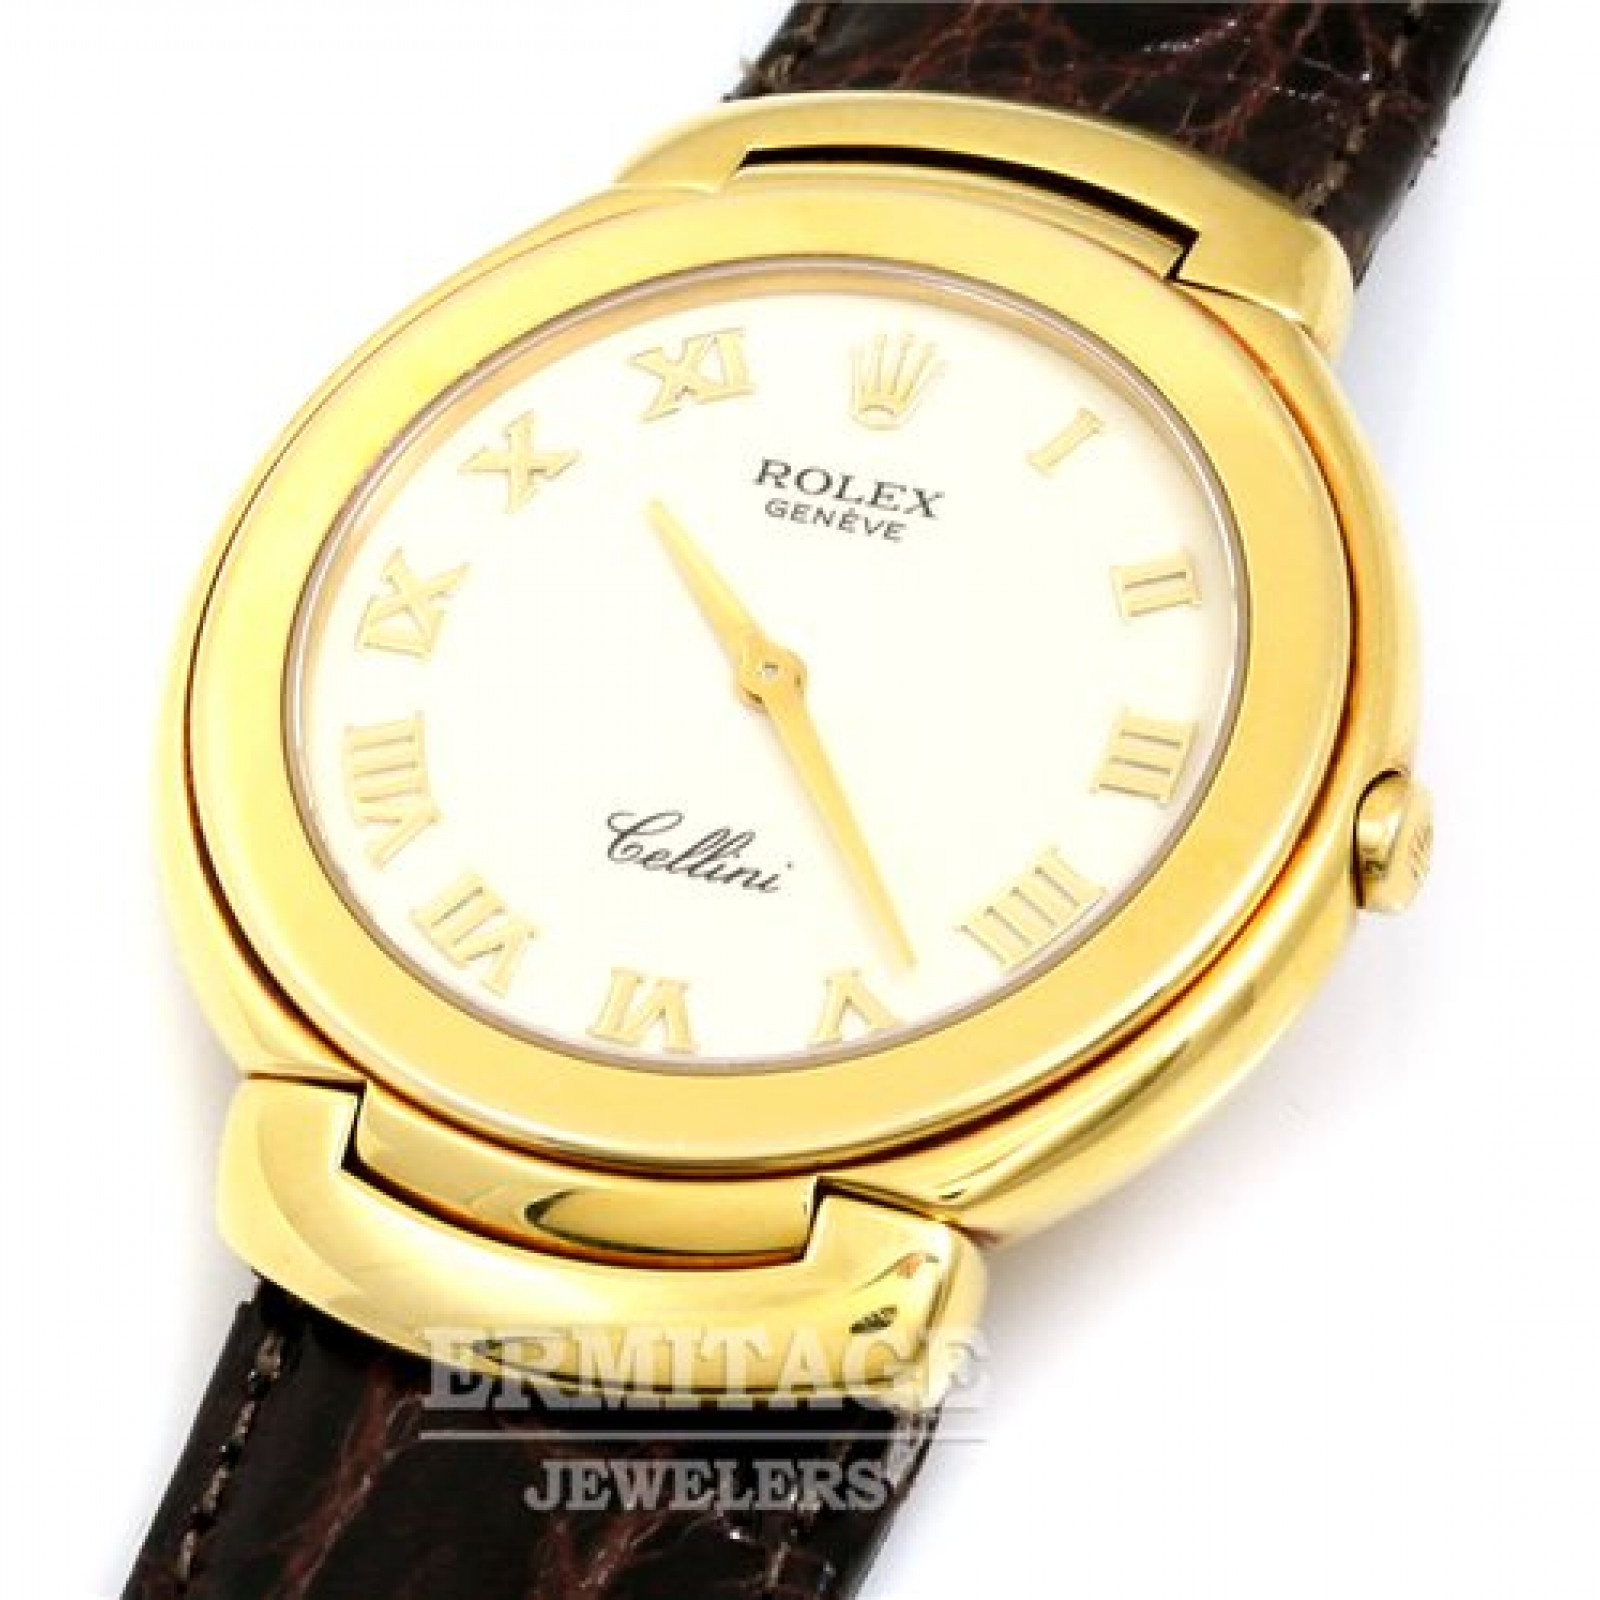 Pre-Owned Rolex Cellini 6623 Gold Year 1994